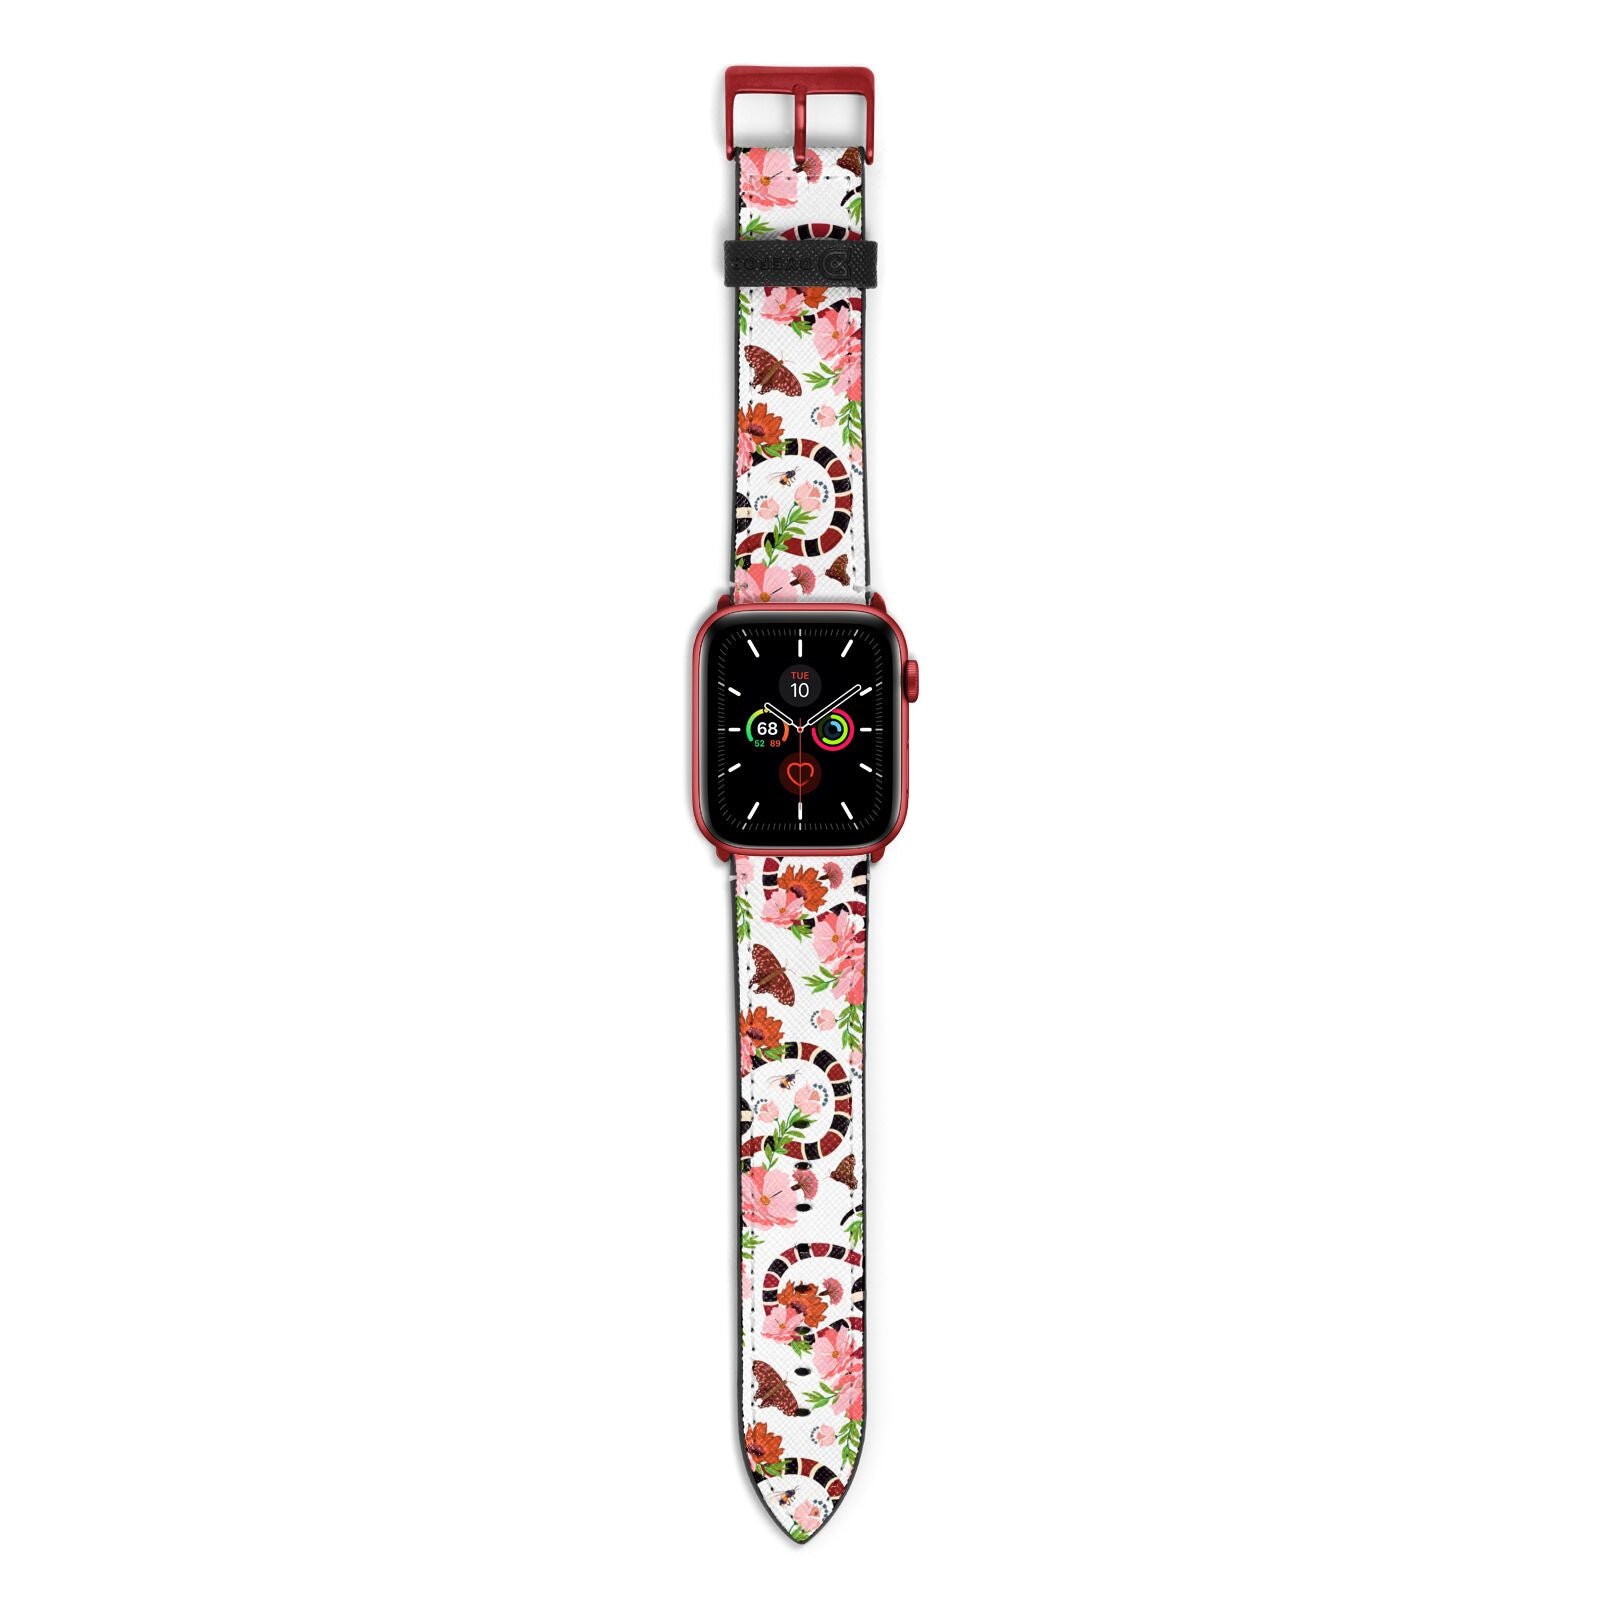 Floral Snake Apple Watch Strap with Red Hardware